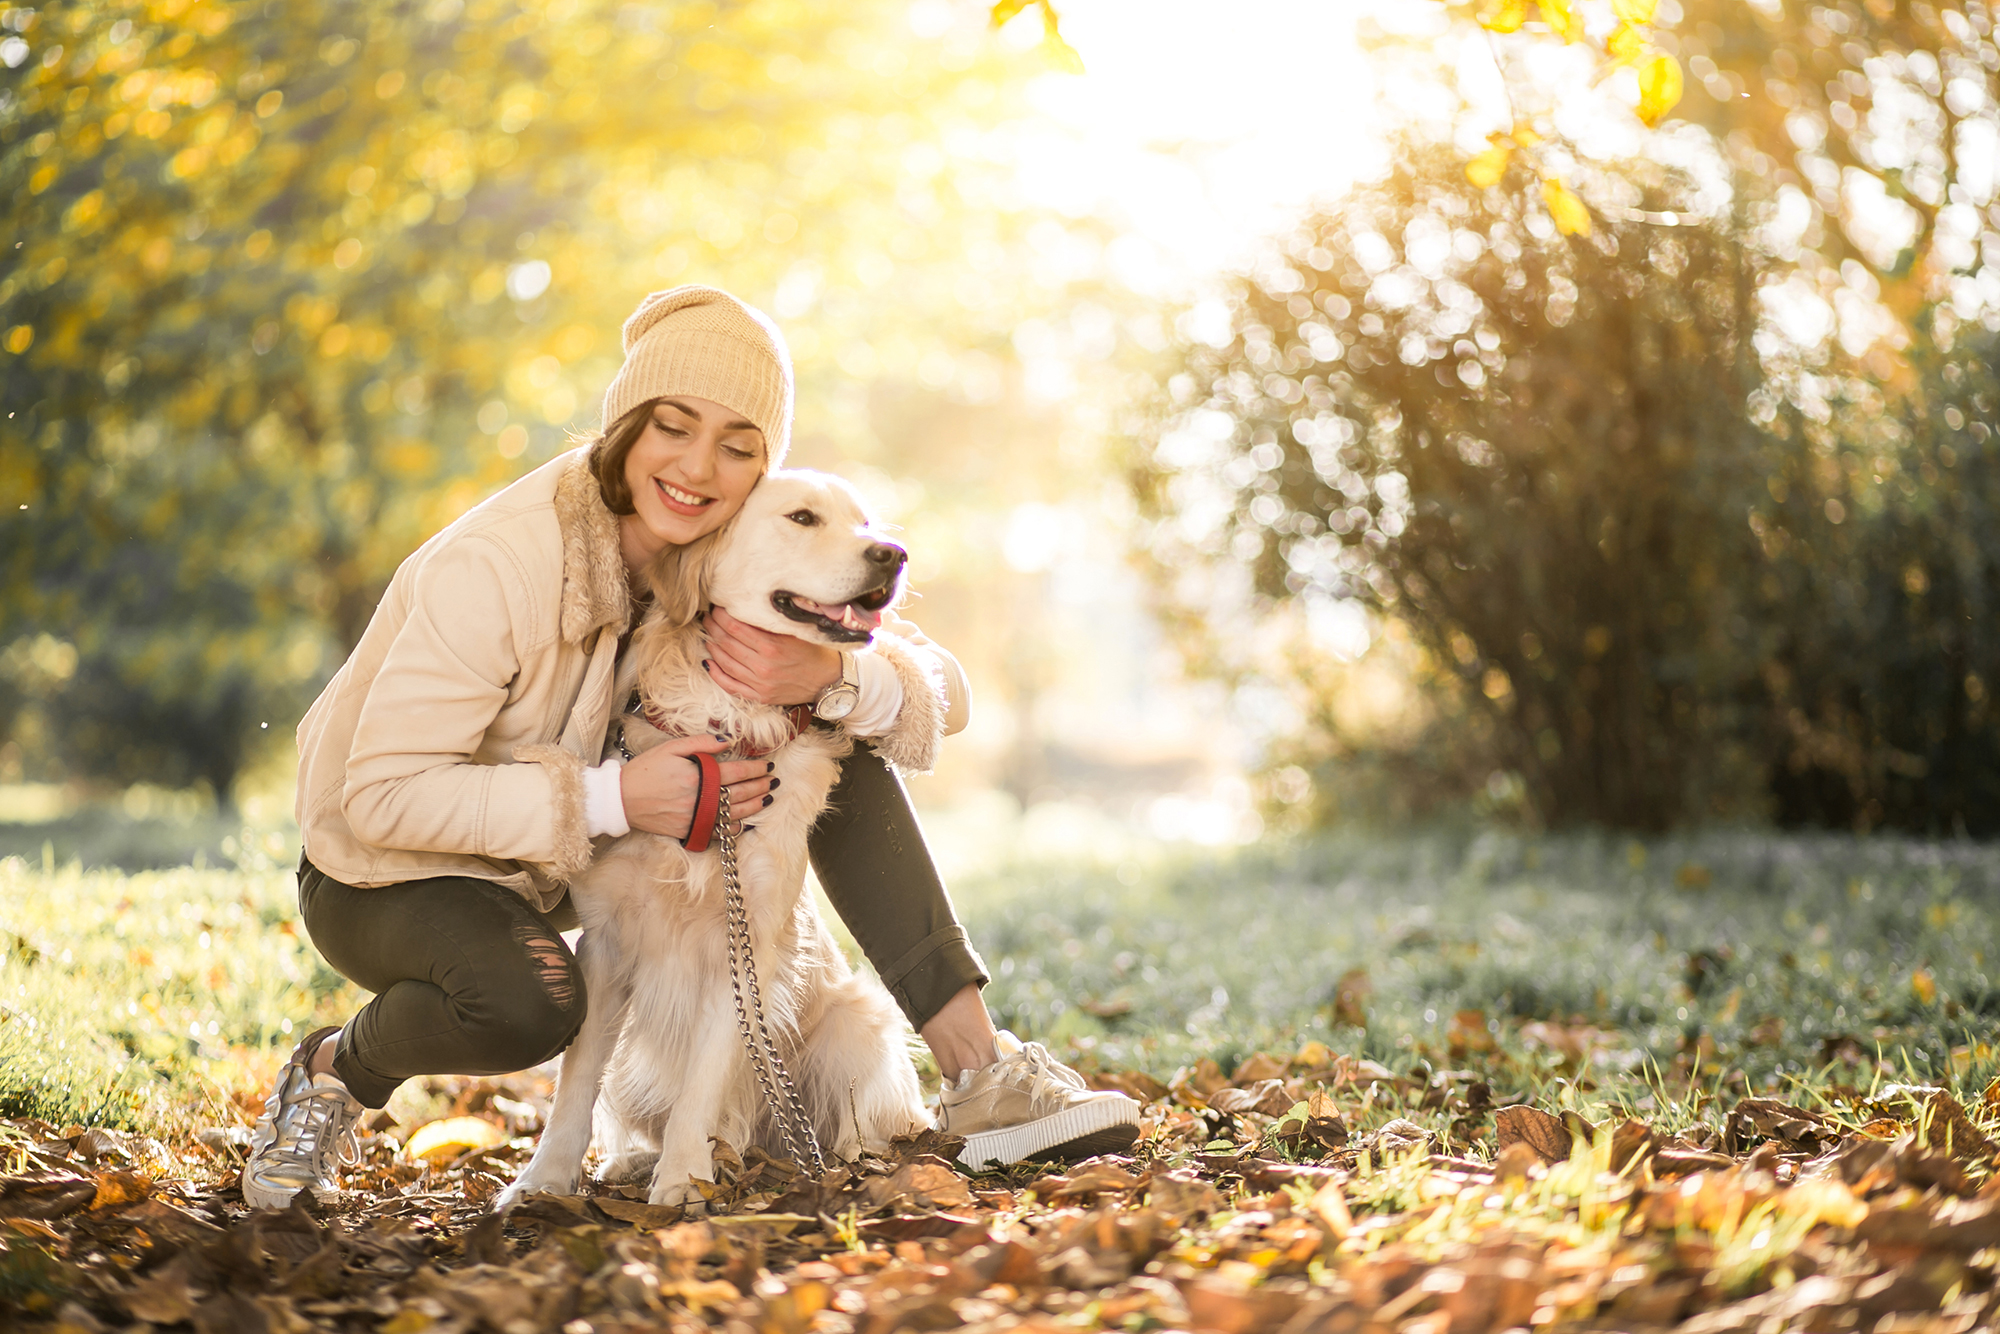 Ways To Make Your Pet’s Last Day Special